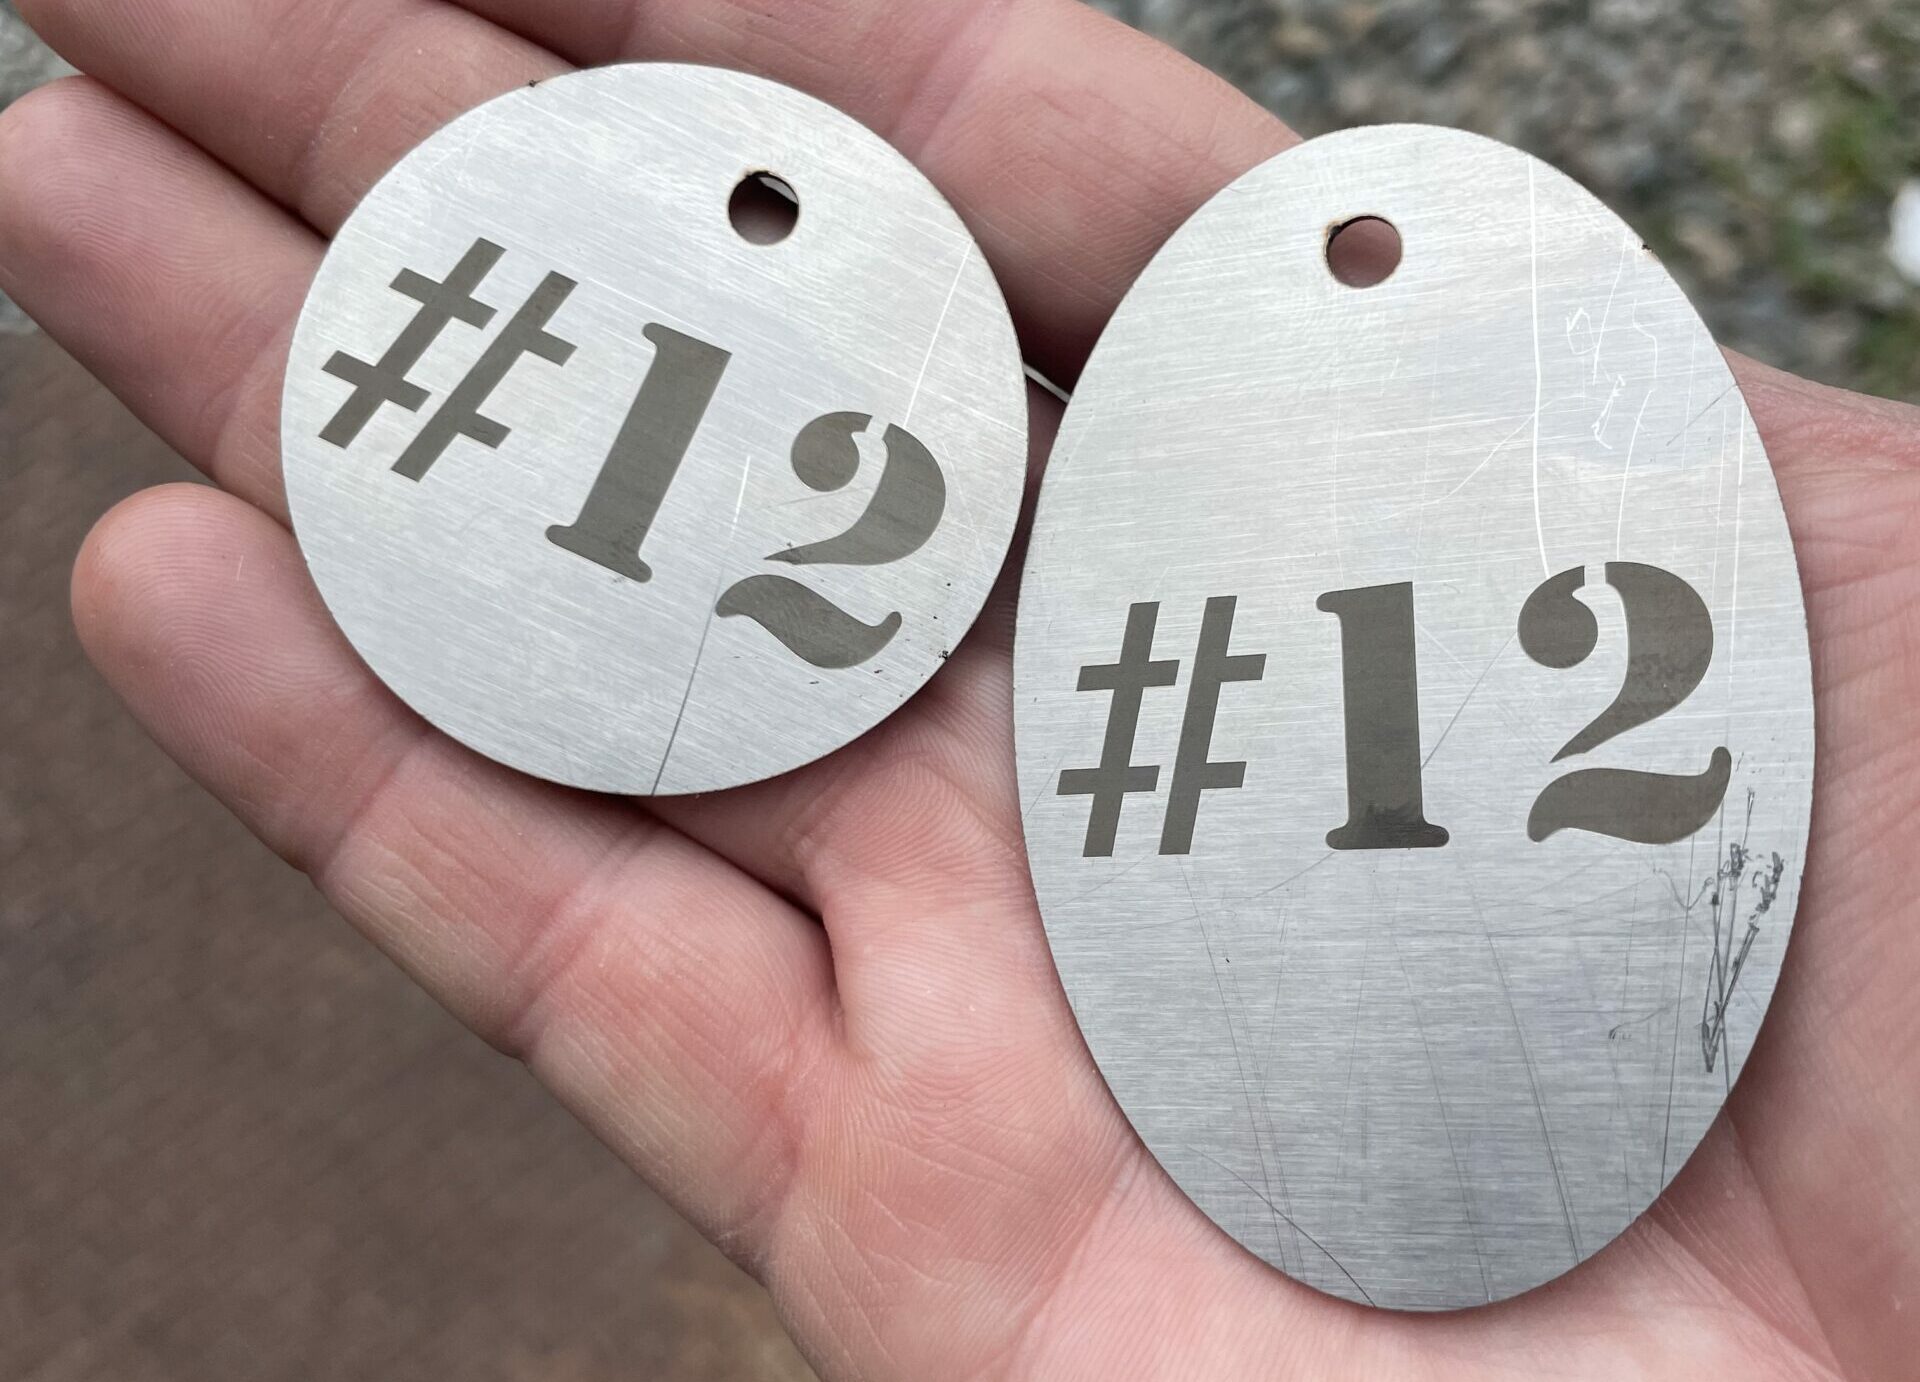 Engraved Pet Tags: A Palm holds two silver metal tags" one is circular and one is an elongated oval. Both have a hole punched at the top and "#12" laser engraved onto them.